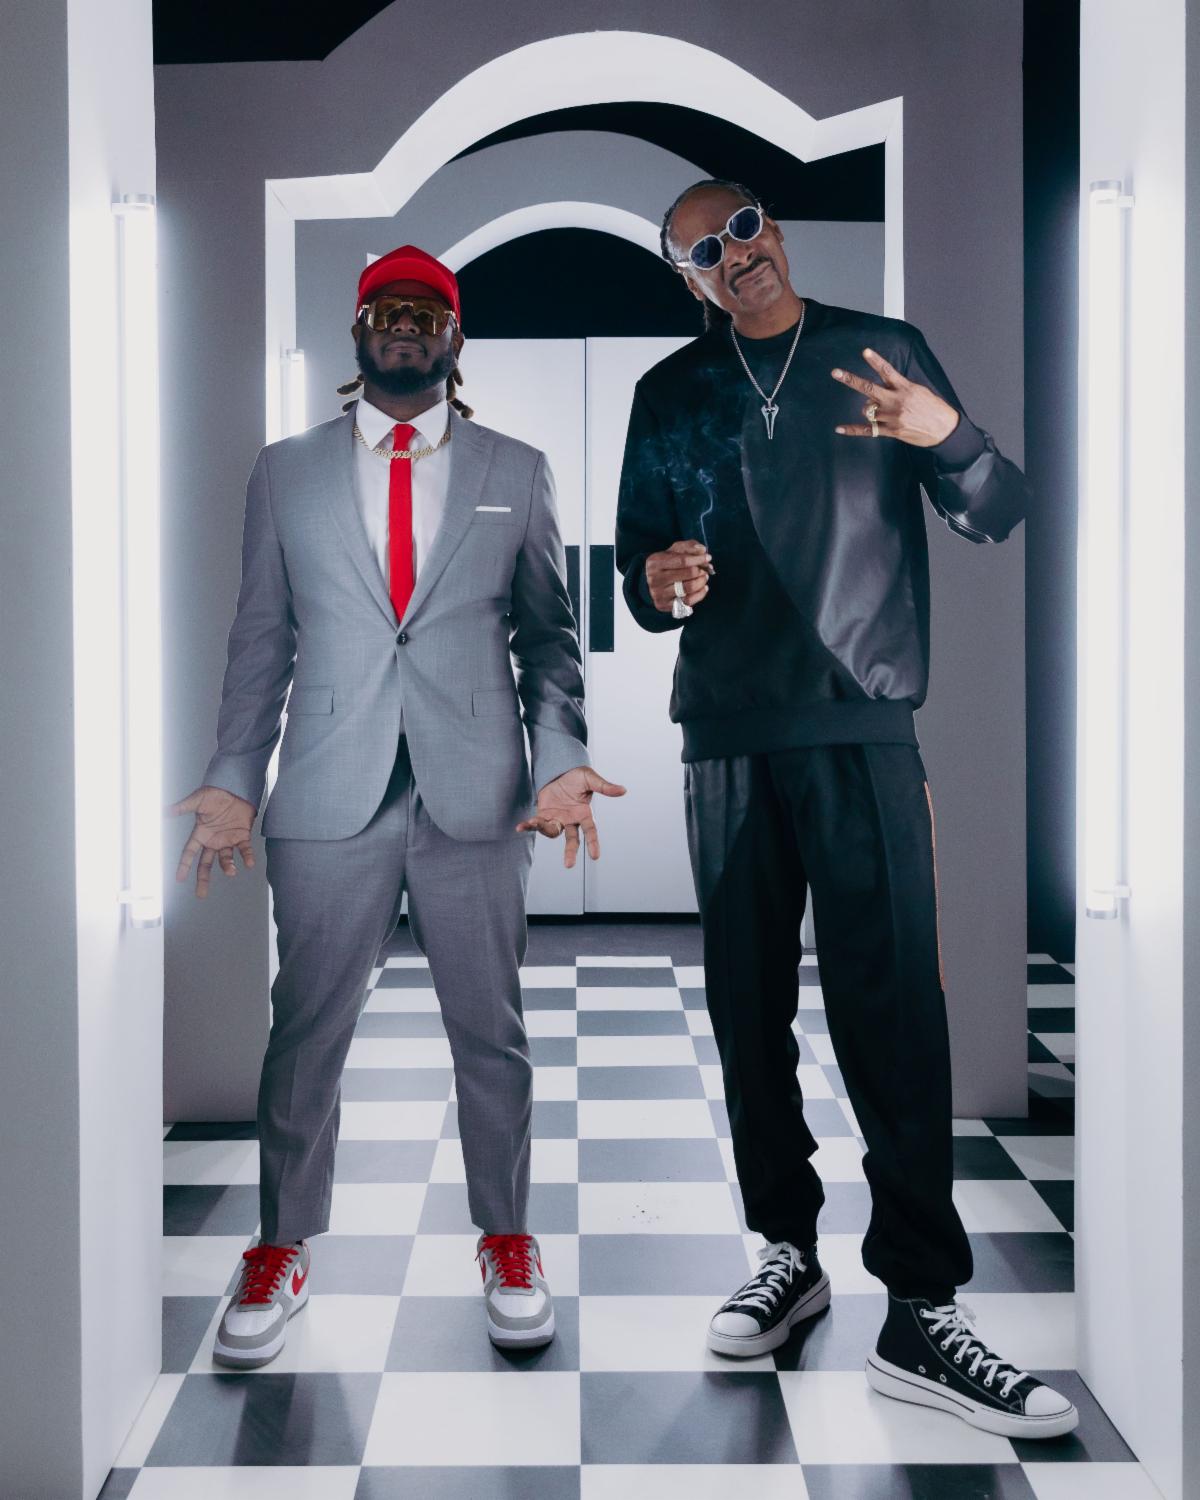 T-Pain & Snoop Dogg "That's How We Ballin" Single and Video